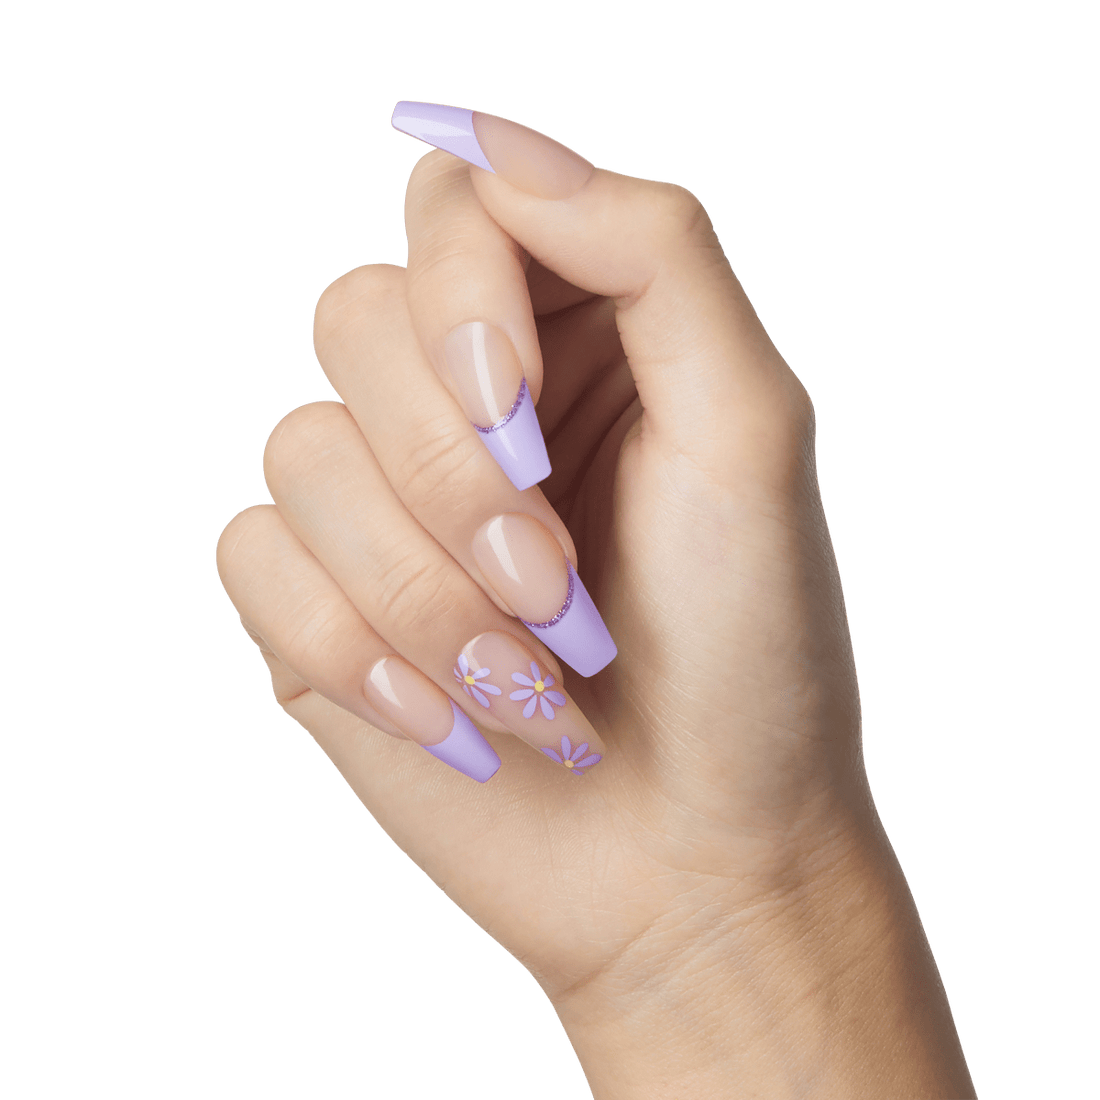 KISS Voguish Fantasy, Press-On Nails, Sunkissed, Purple, Long Coffin, 28ct